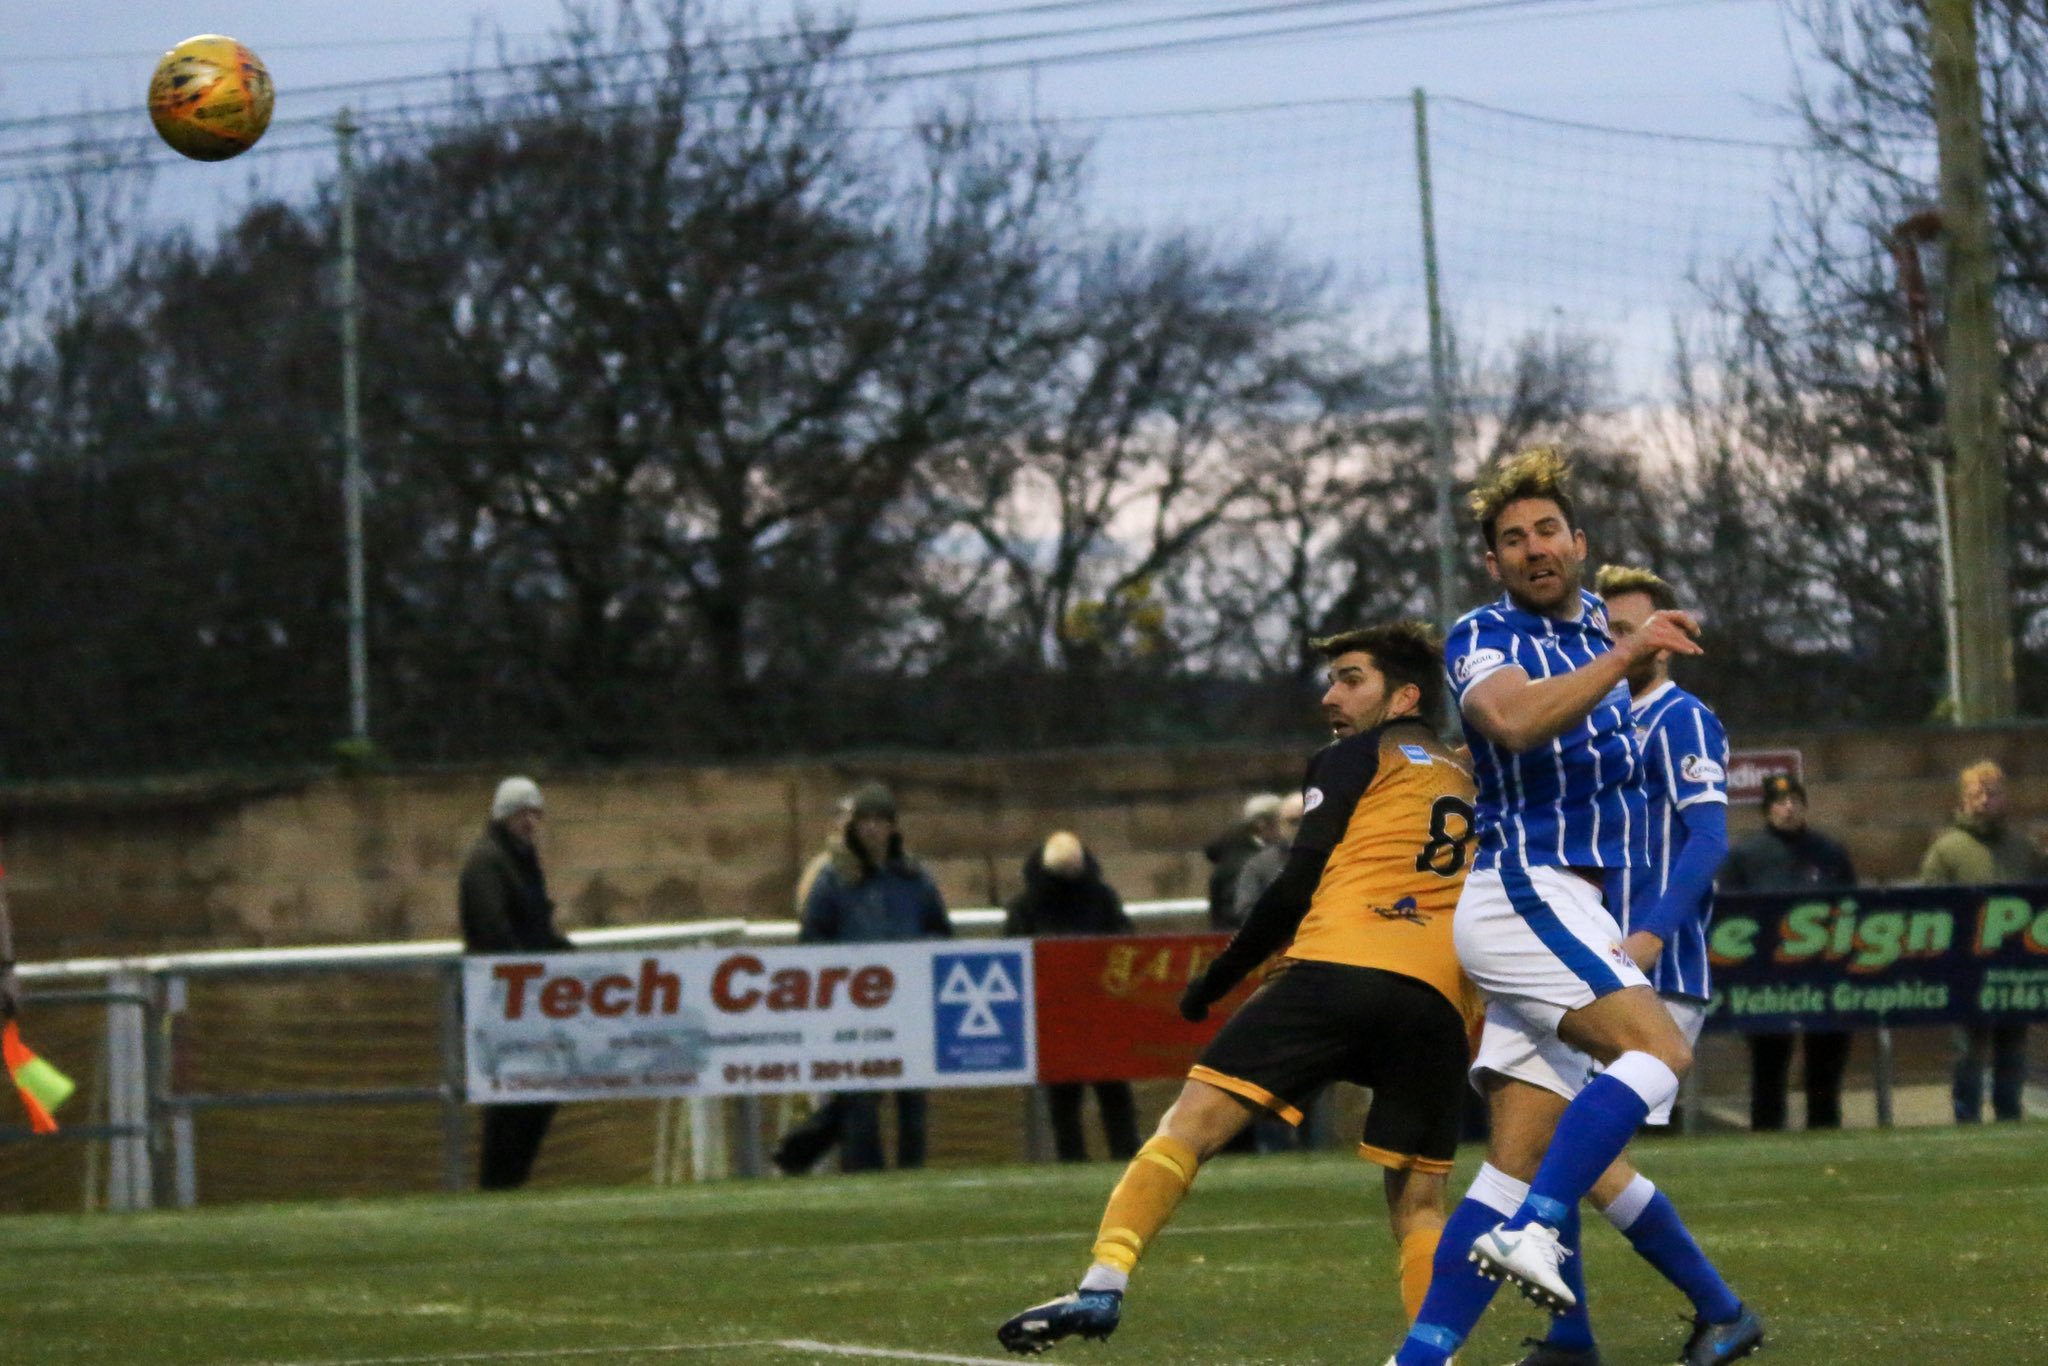 Midfielder Kyle Wilkie on target as Annan Athletic get the better of Cowdenbeath - News & Star